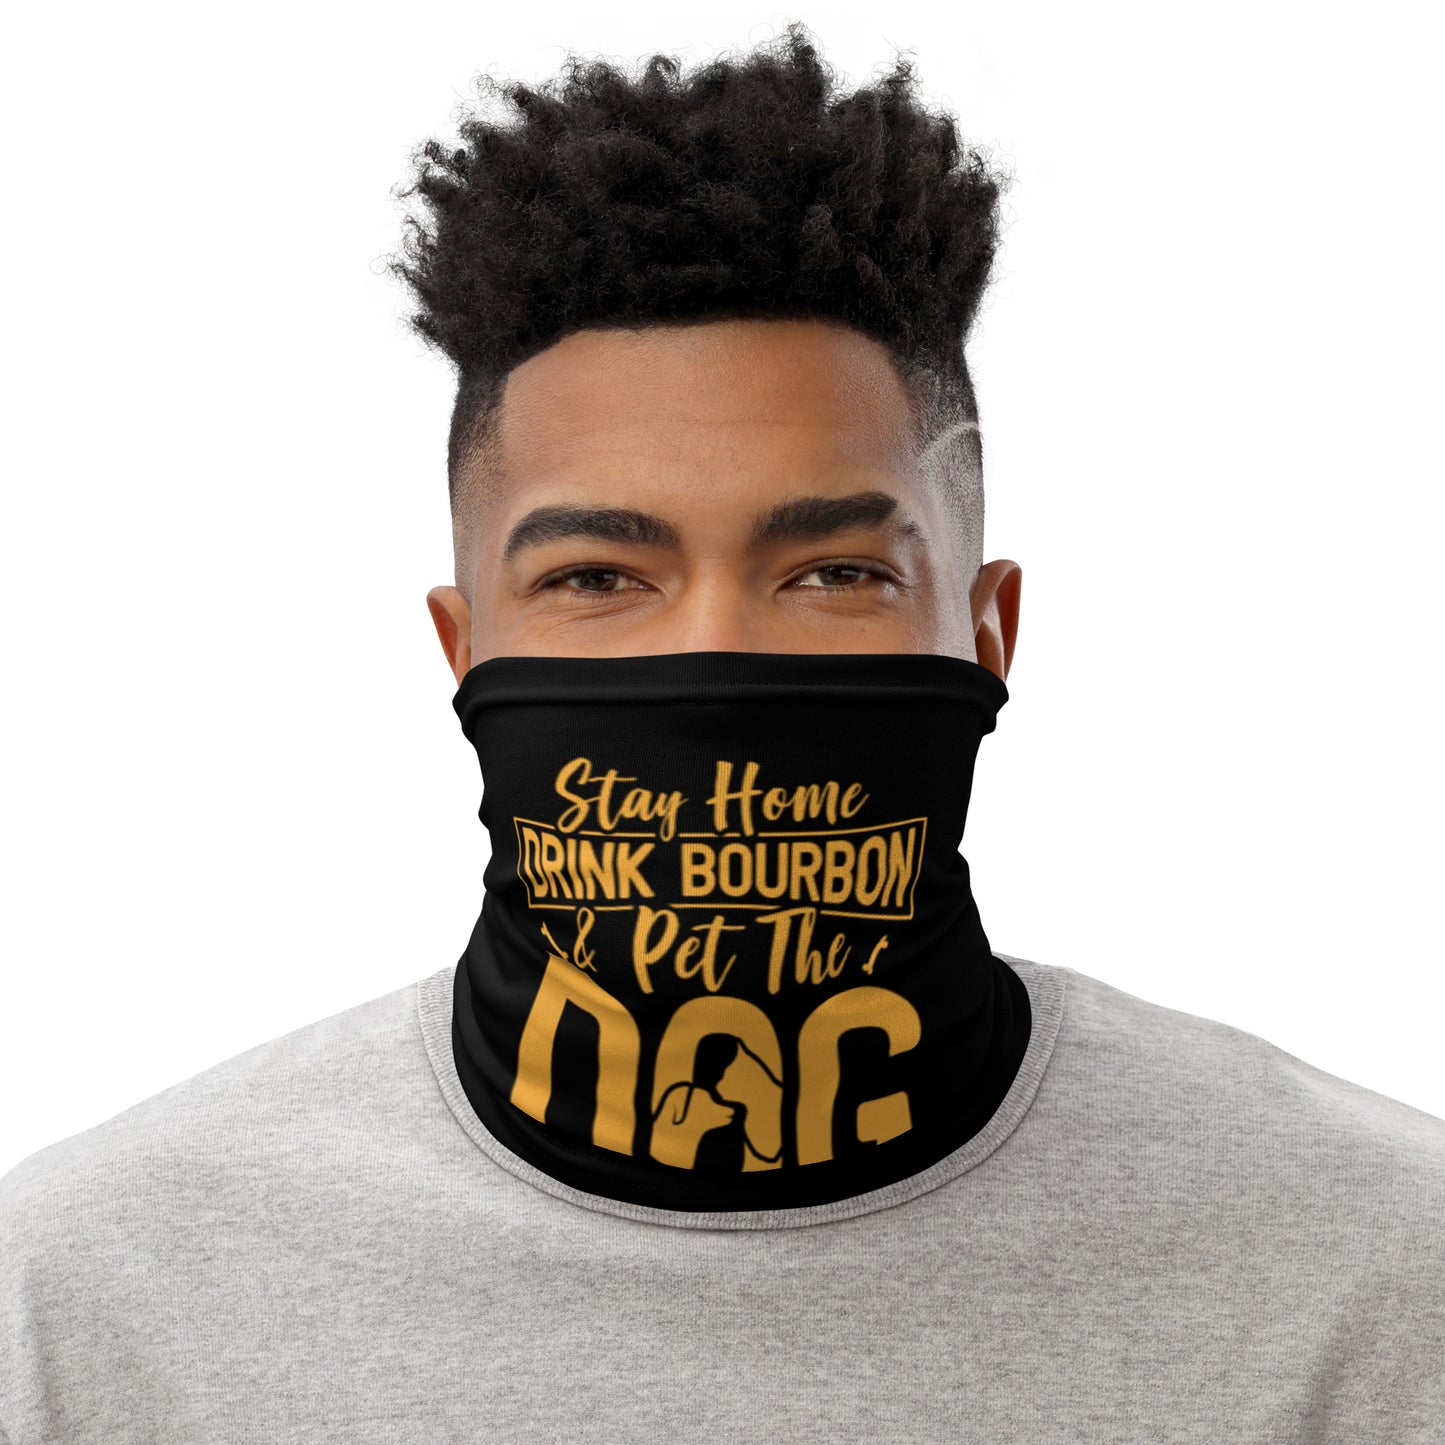 Stay Home Drink Bourbon Pet the Dog Neck Gaiter